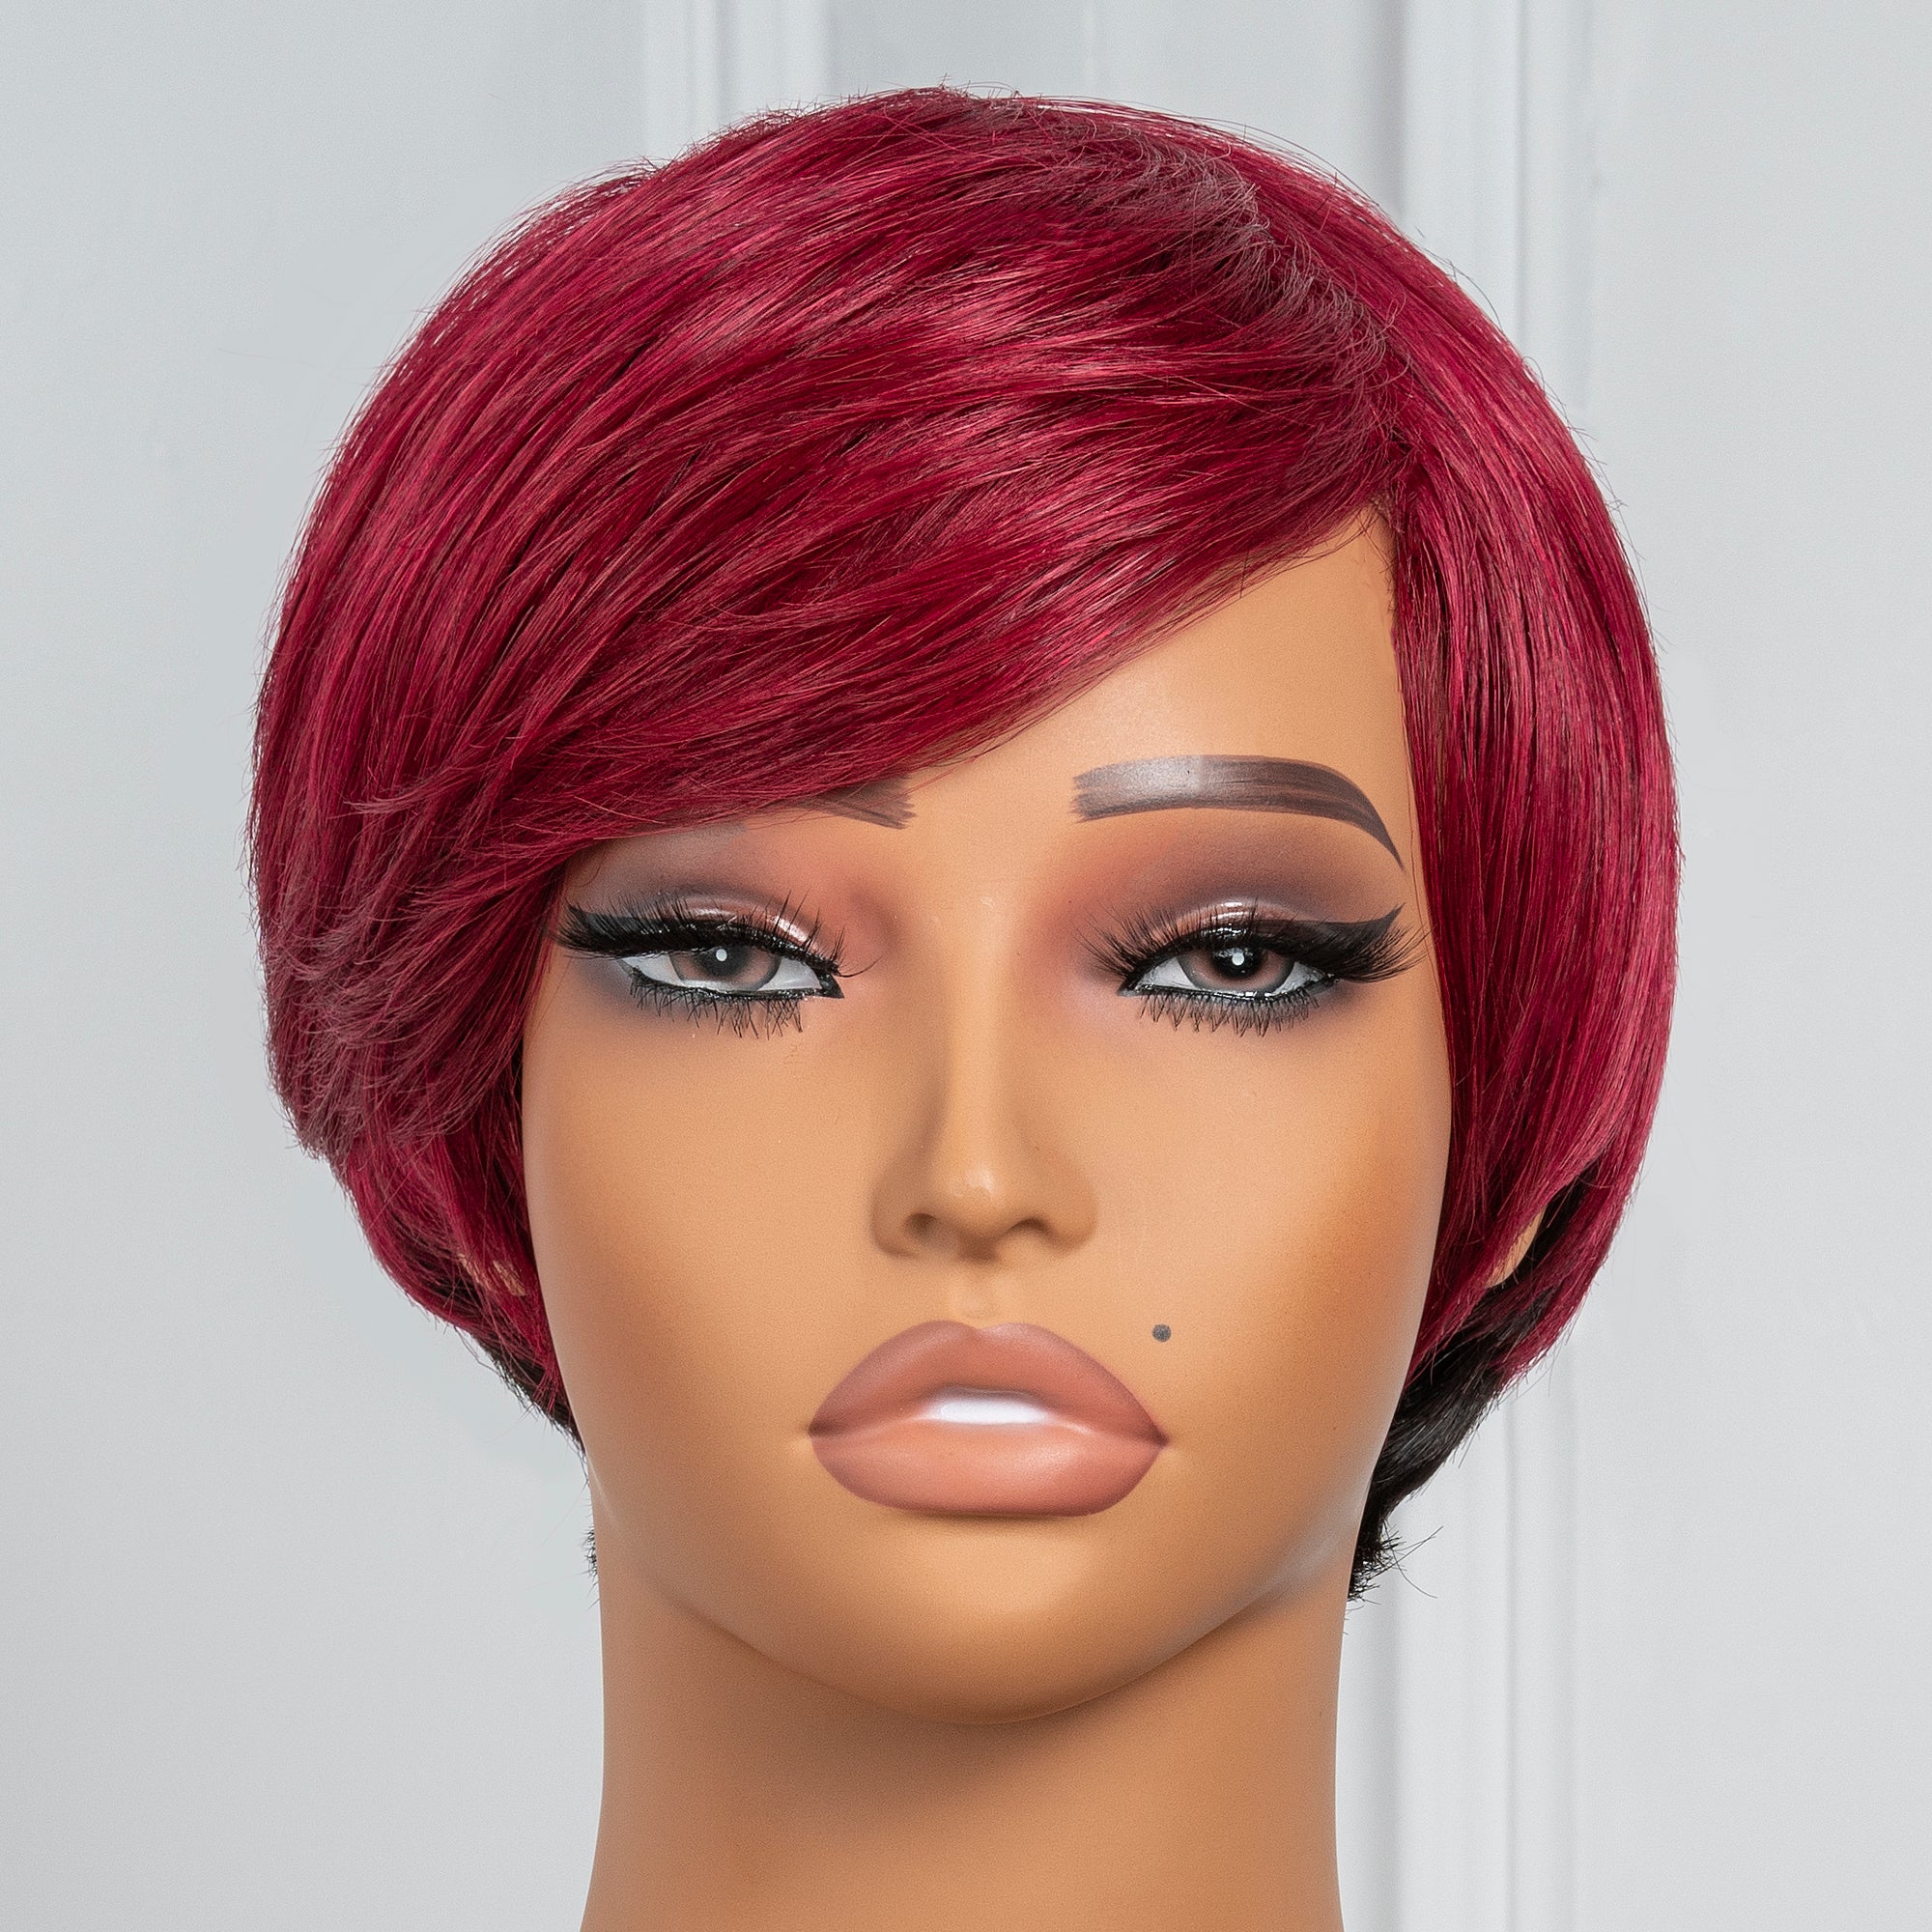 TOYOTRESS VANESSA SHORT NEAT HUMAN HAIR WIG WITH SIDE BANGS 4